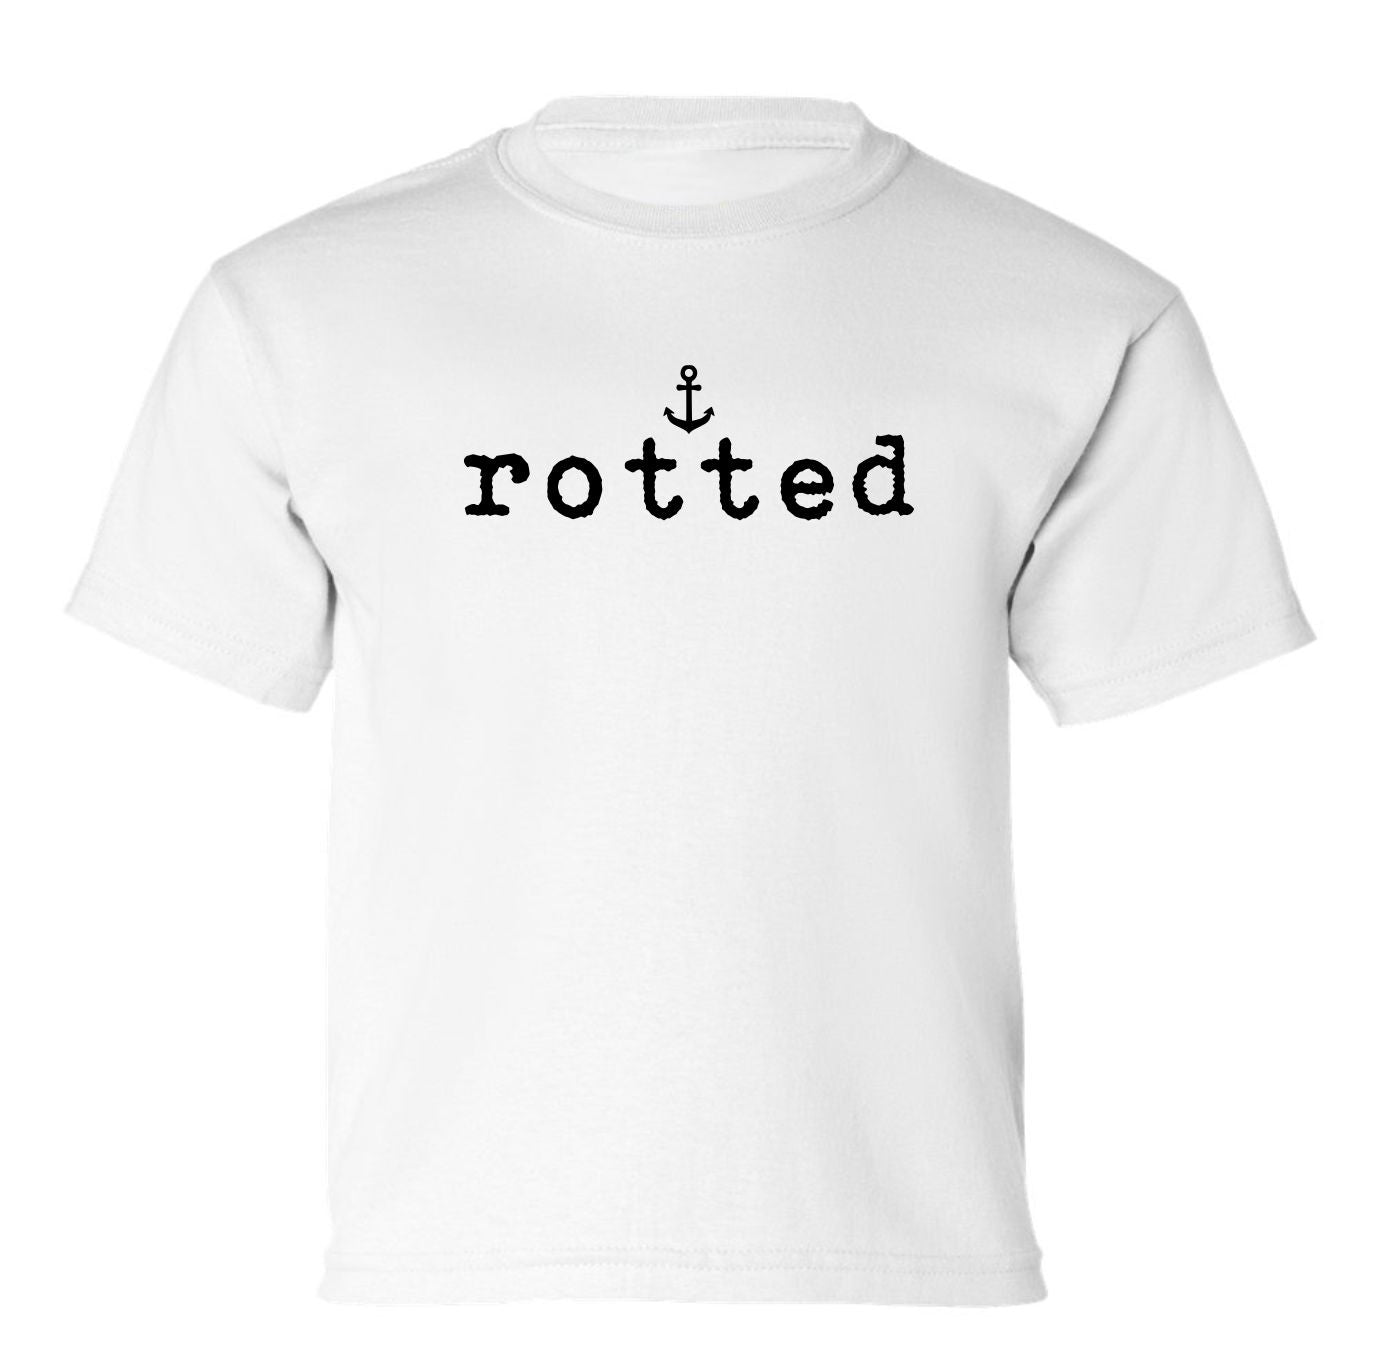 "Rotted" Toddler/Youth T-Shirt